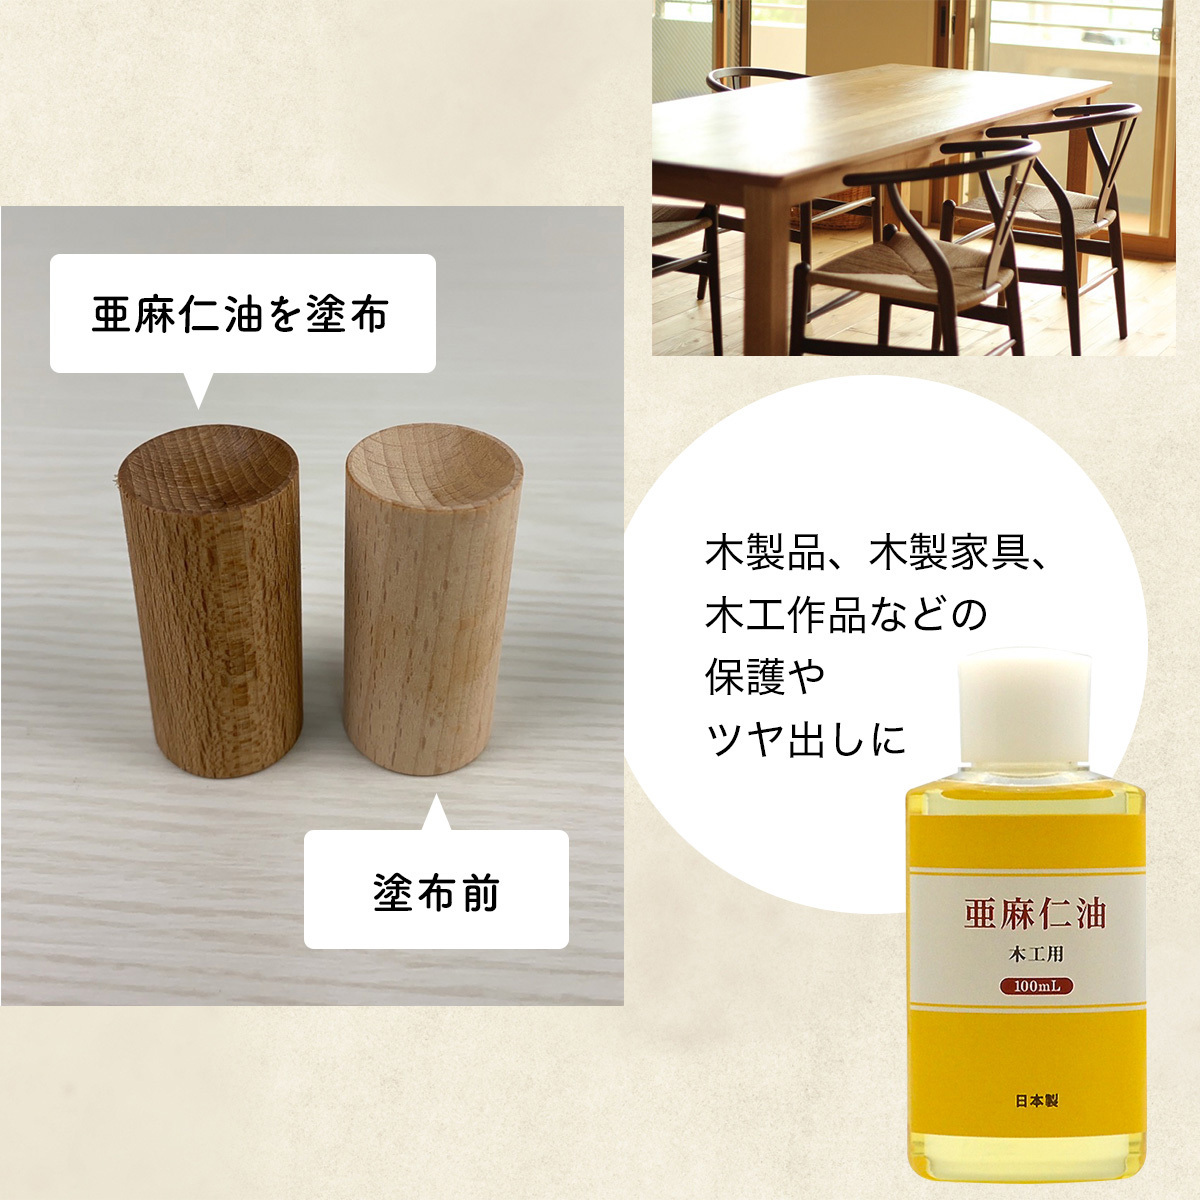  made in Japan for carpenter linseed oil 100ml woodworking wax linseed oil wood oil .. oil gloss varnish finish material protection . furniture woodworking painting natural tree paint oil DIY